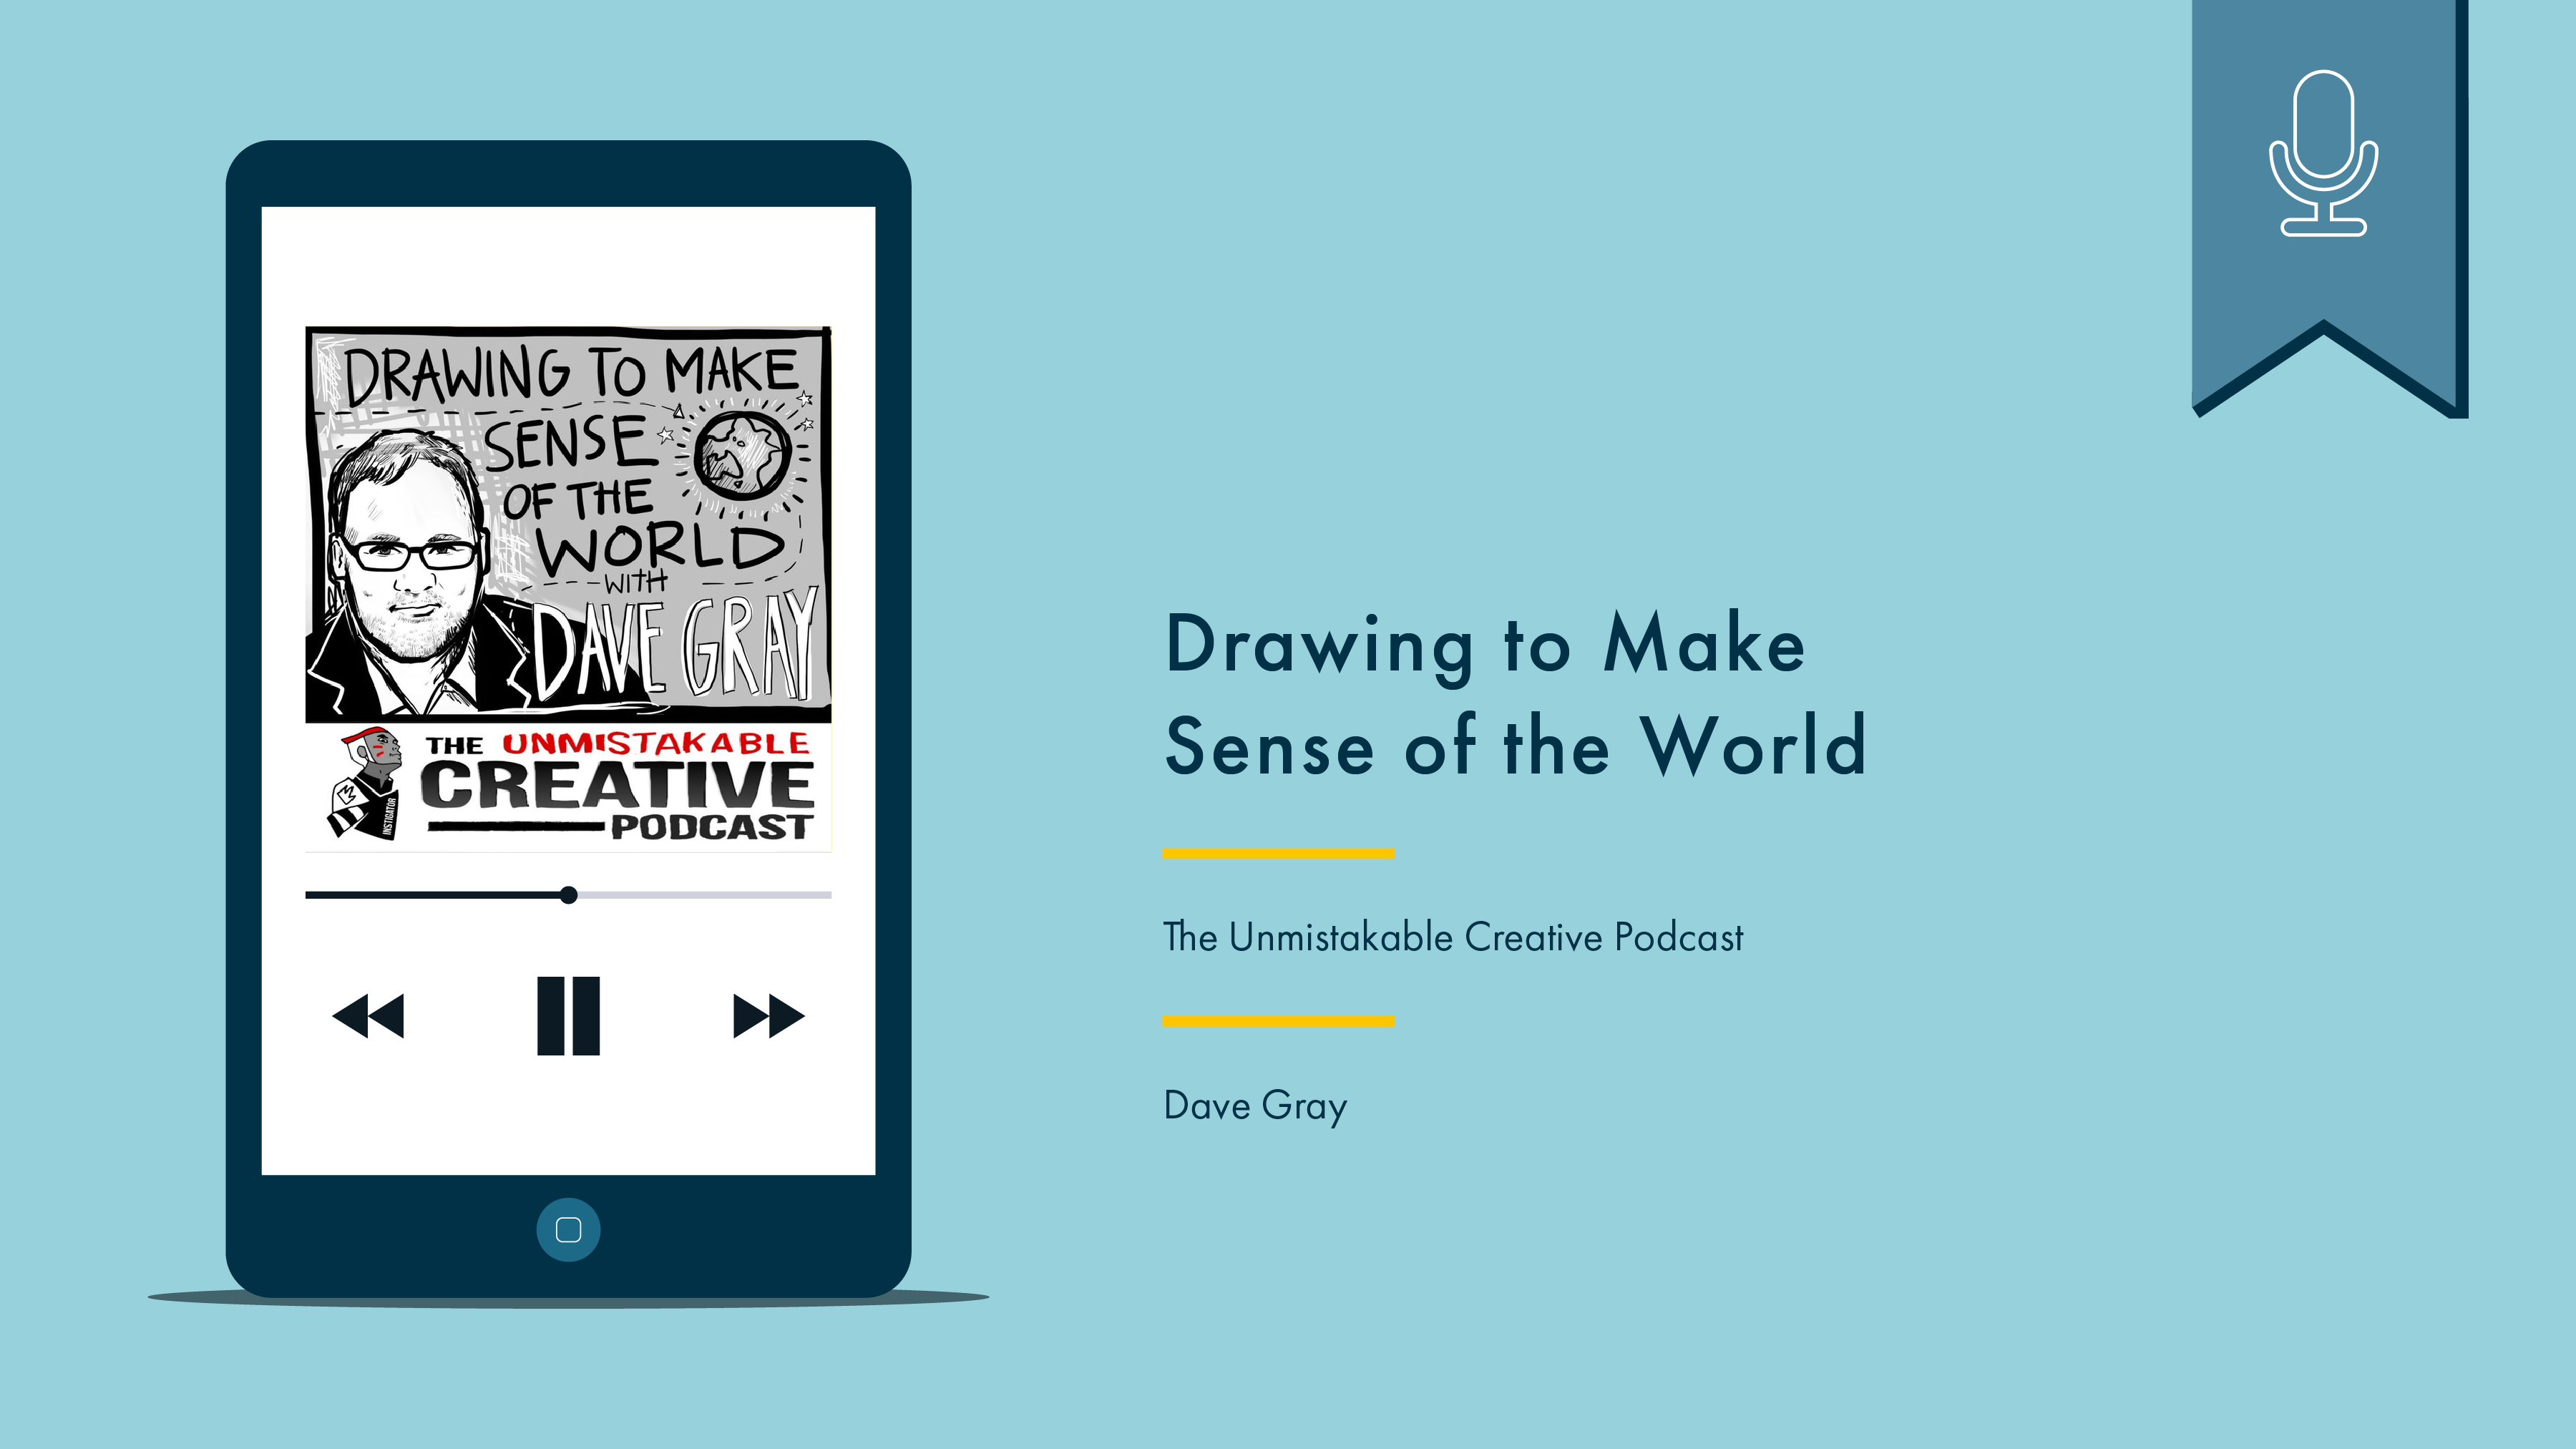 Phone with podcast artwork on the left. On the right reads “Drawing to Make Sense of the World, The Unmistakable Creative Podcast, Dave Gray.” Above is a blue flag with a white icon denoting that this is a podcast.